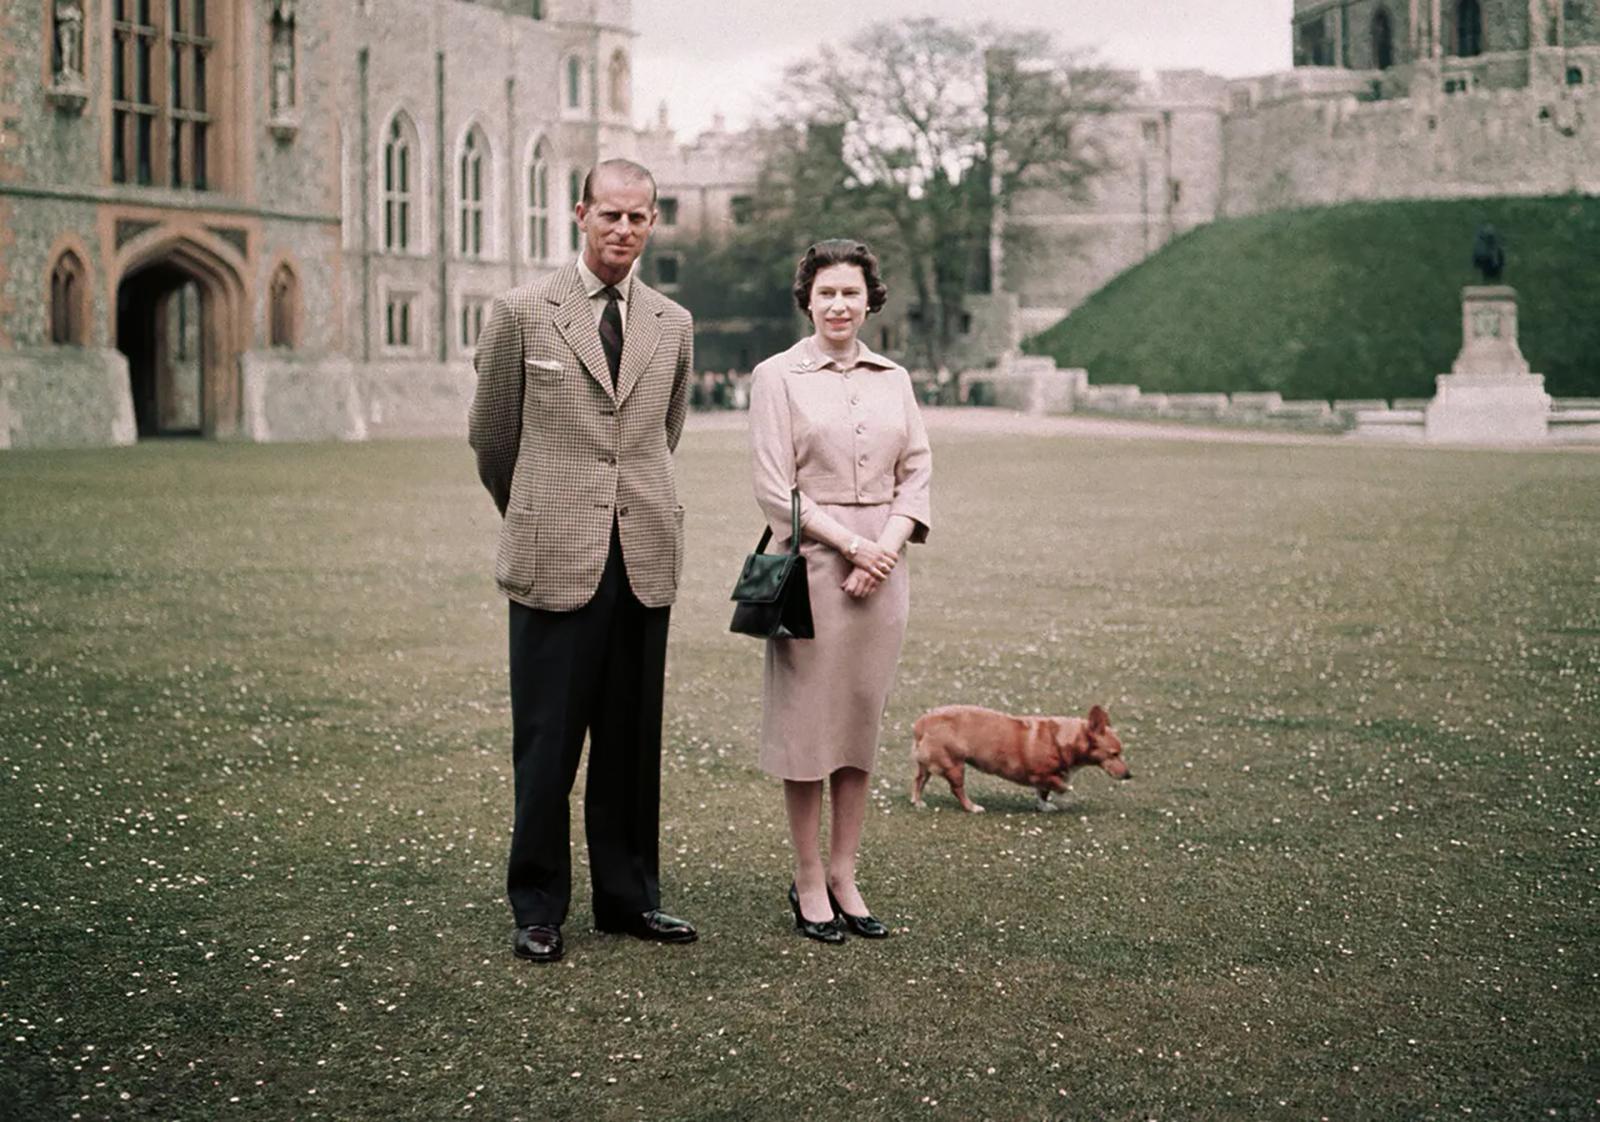 7 Facts About Elizabeth II That She Wouldn’t Want You To Know - image 2